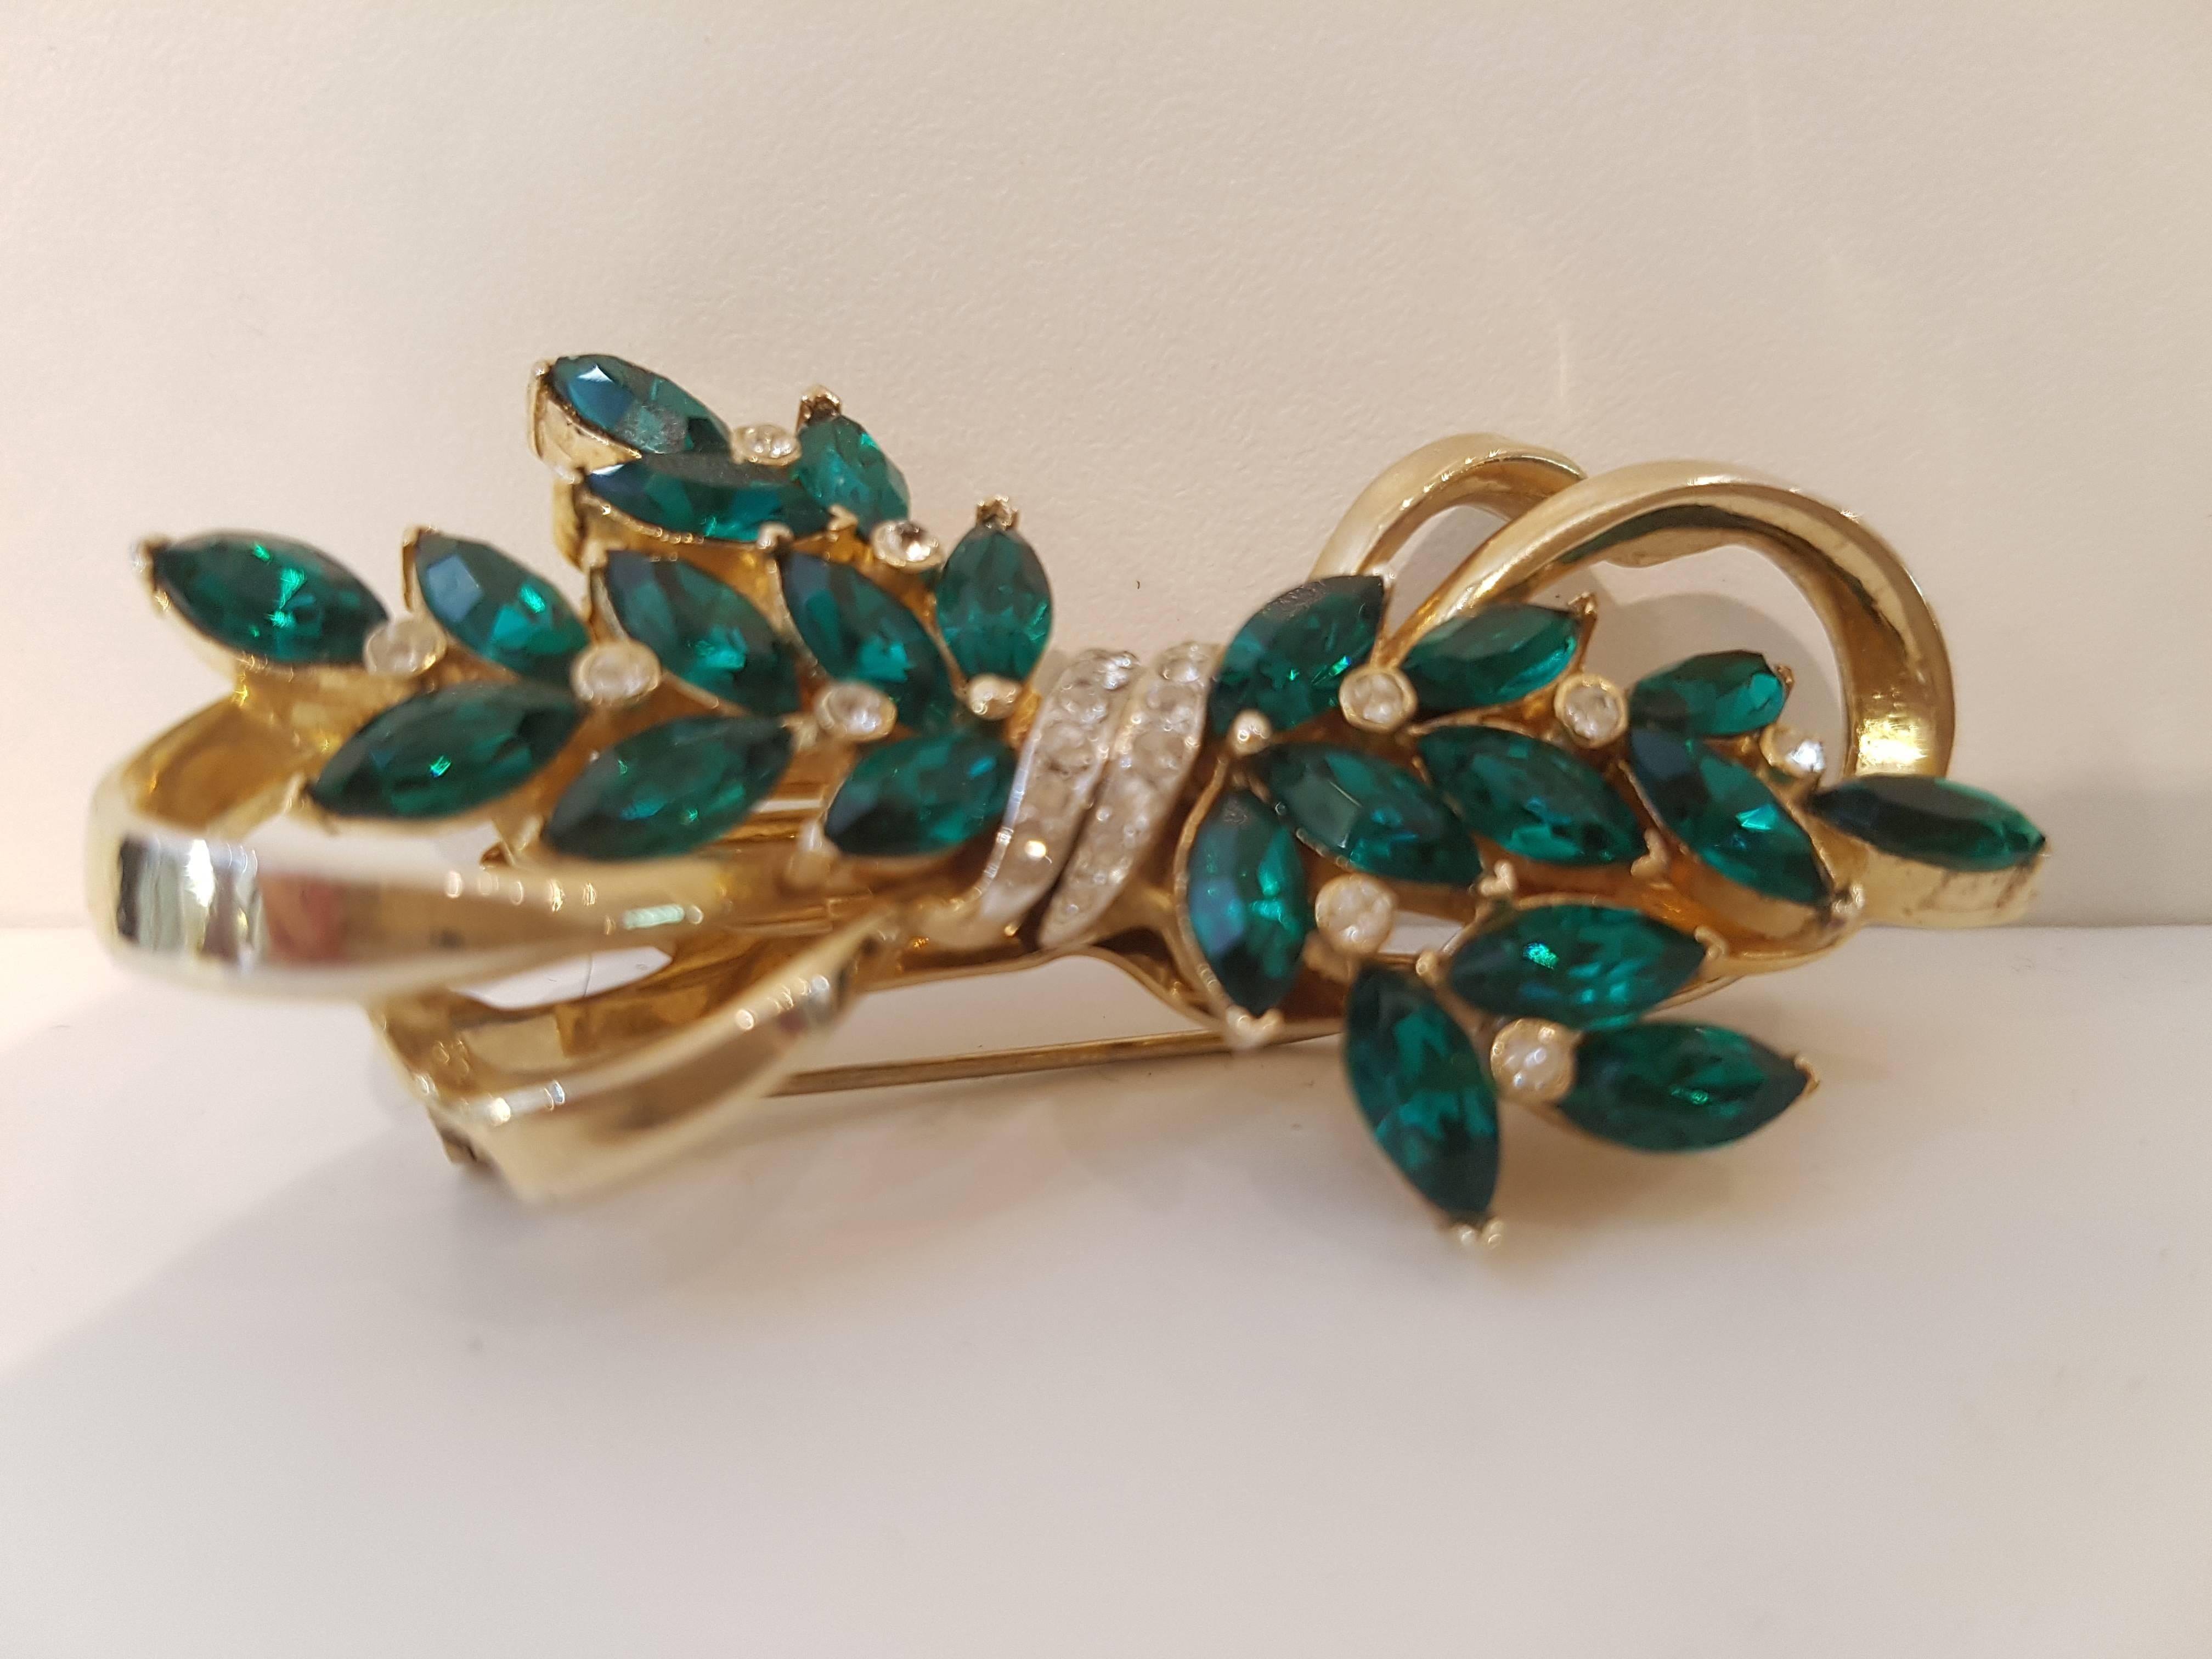 1980s Corocraft Vintage Brooch

Gold tone with green and crystal tone stones